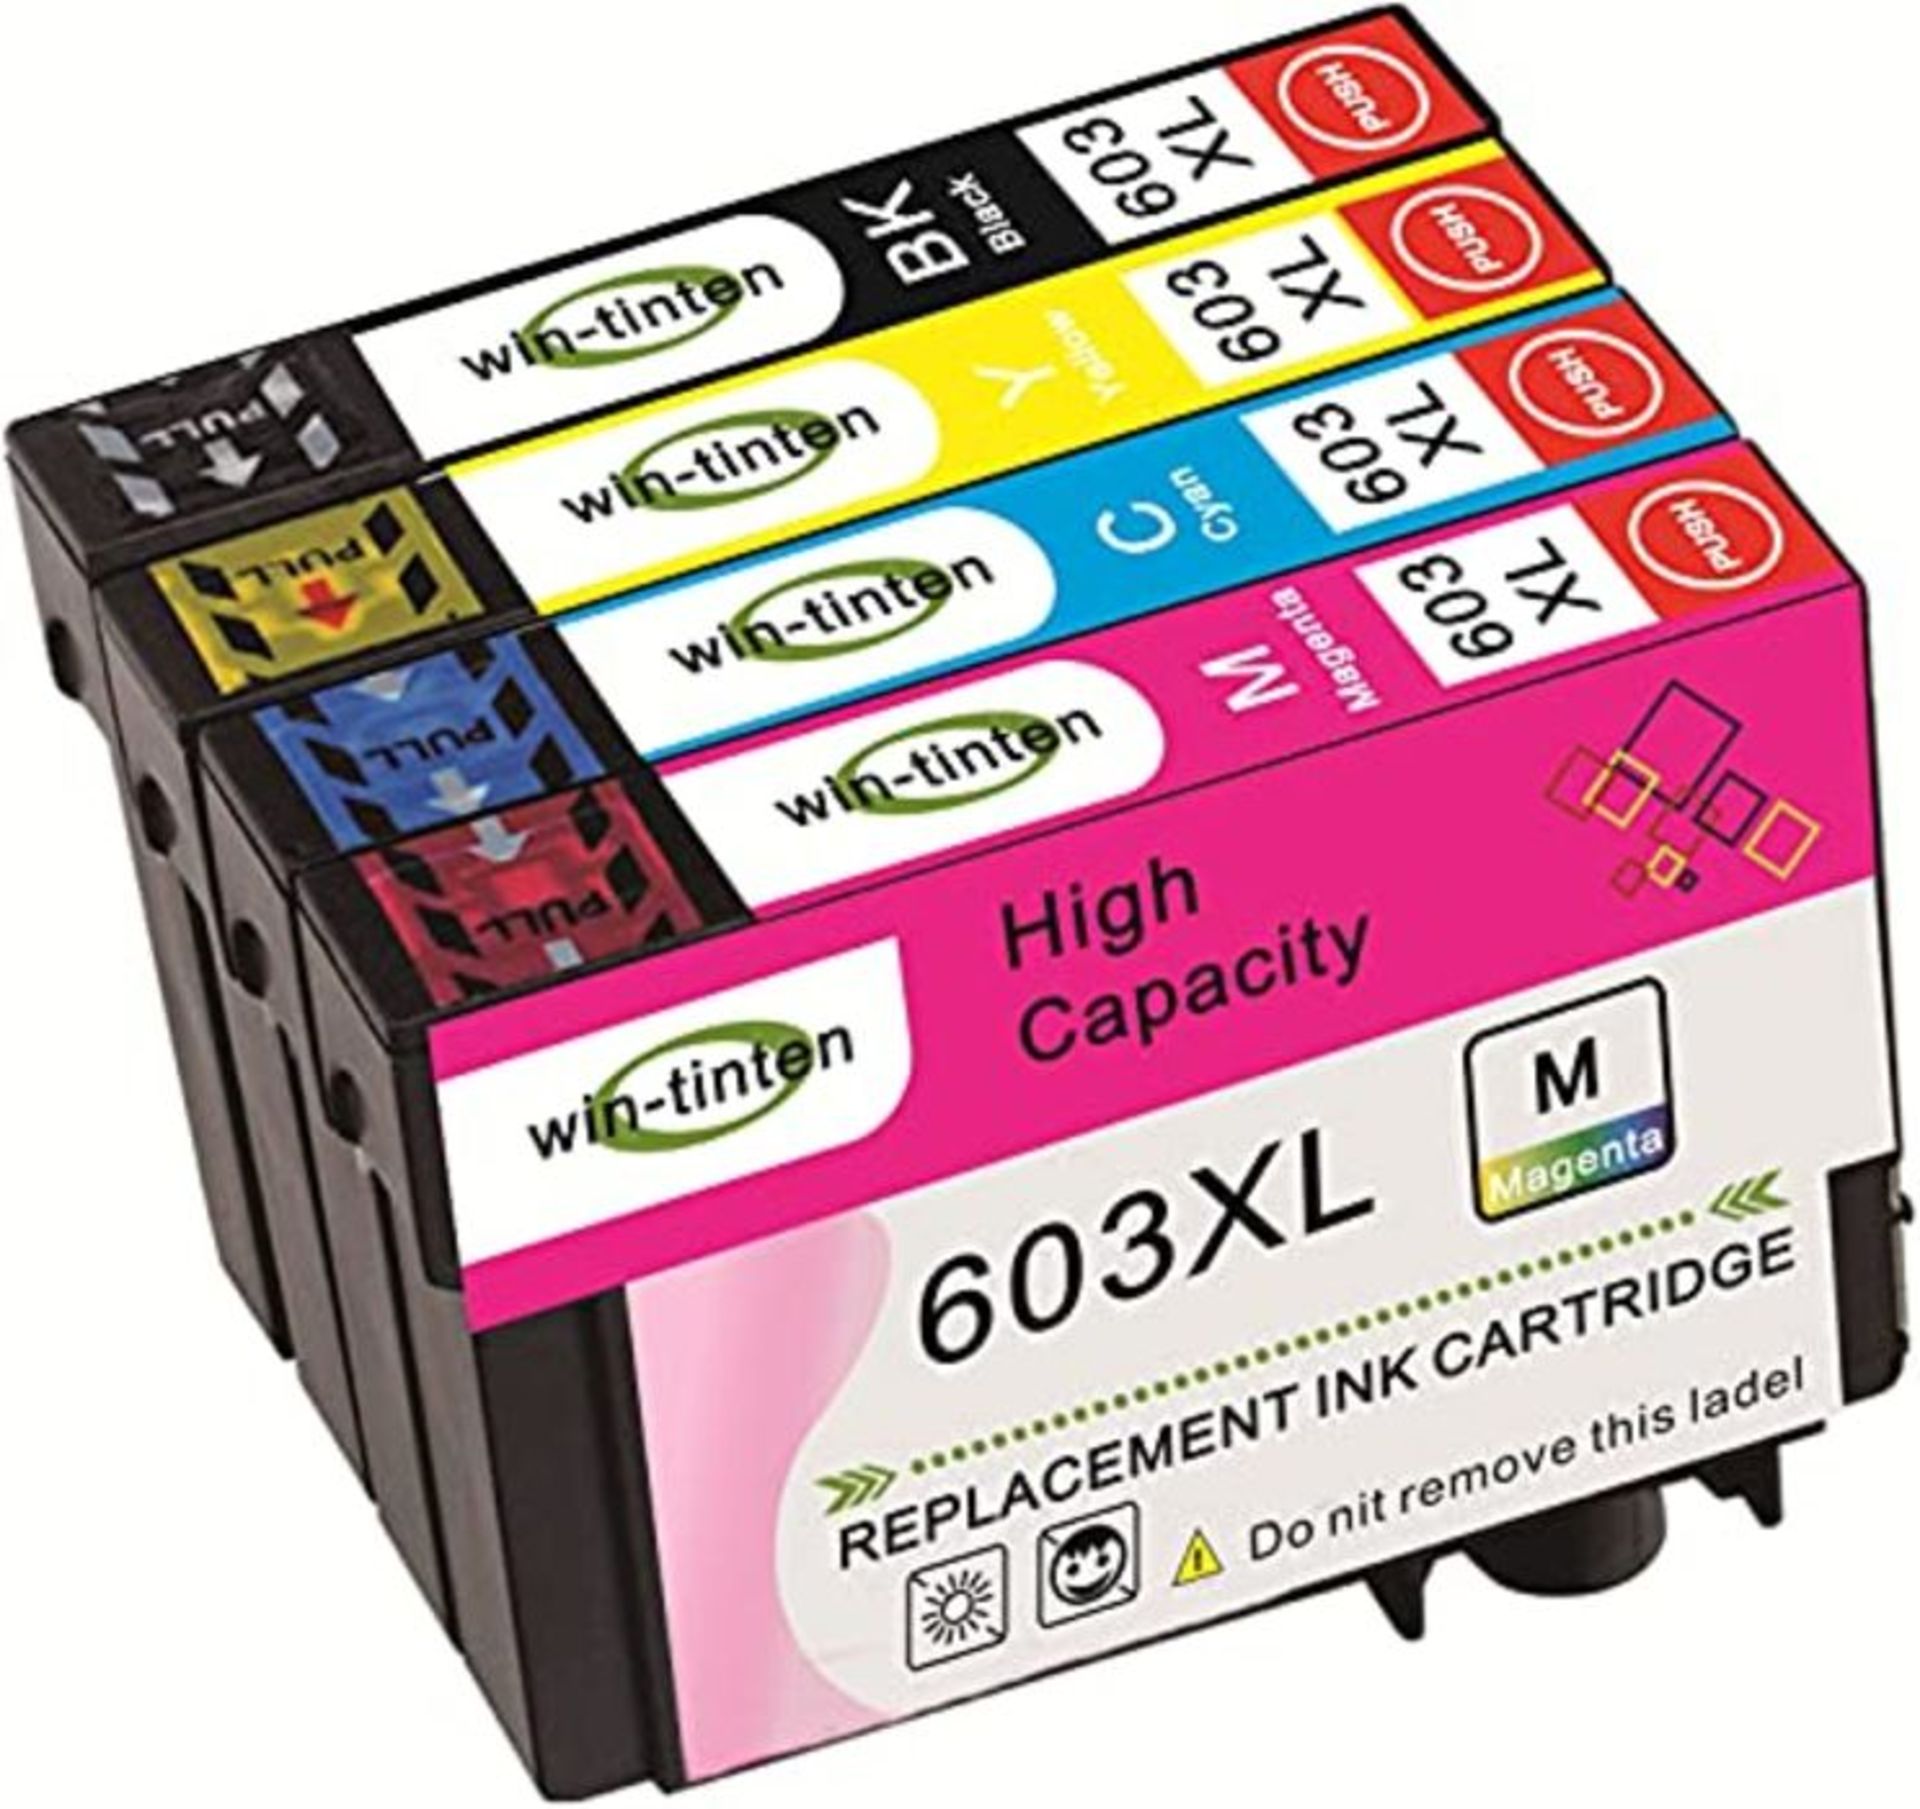 Win-Tinten Compatible Ink Cartridges 603XL Replacement for Epson 603 XL for Epson Expr